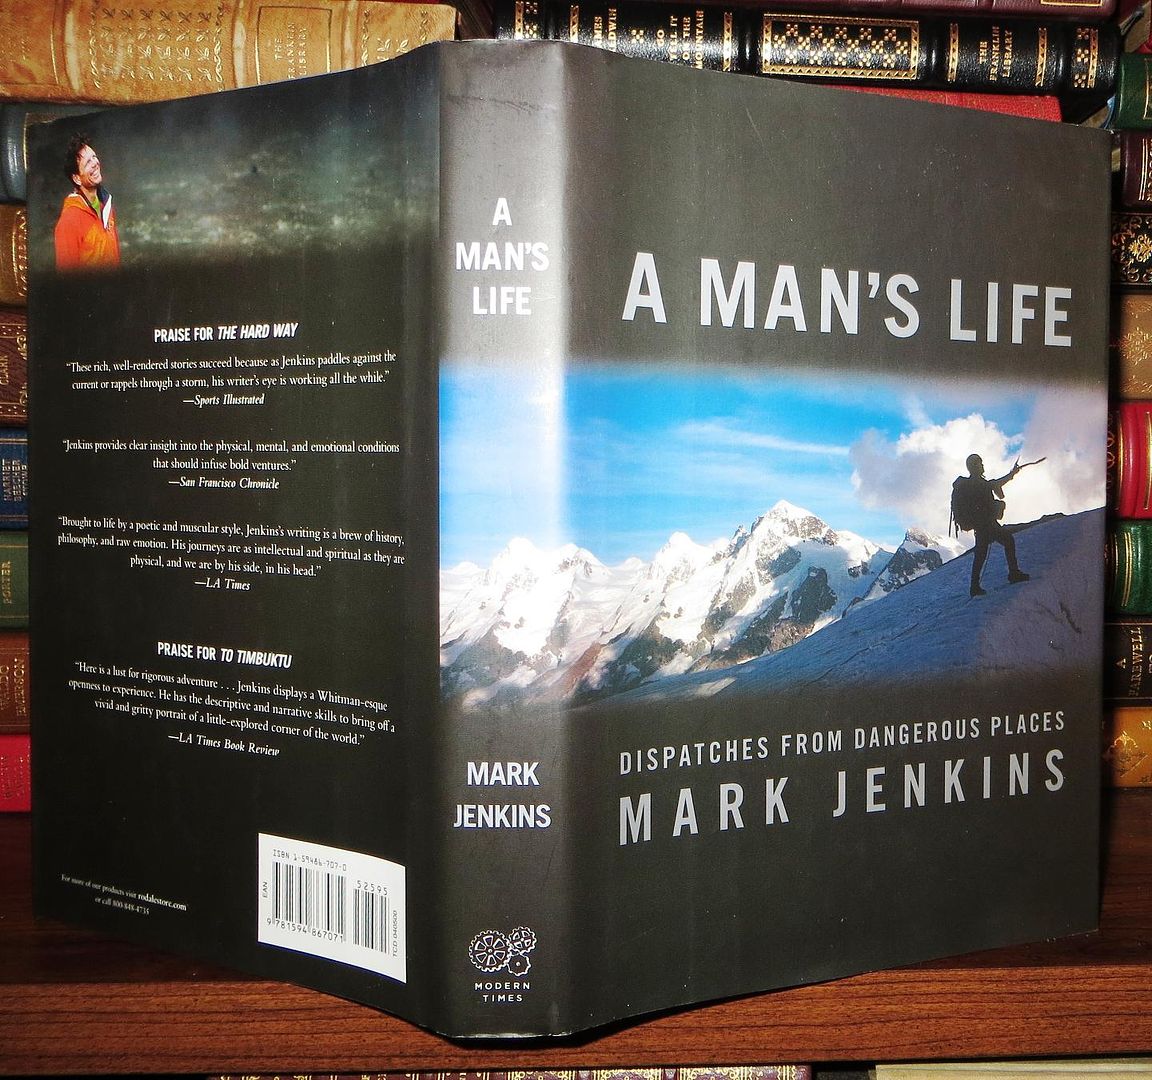 JENKINS, MARK - A Man's Life Dispatches from Dangerous Places